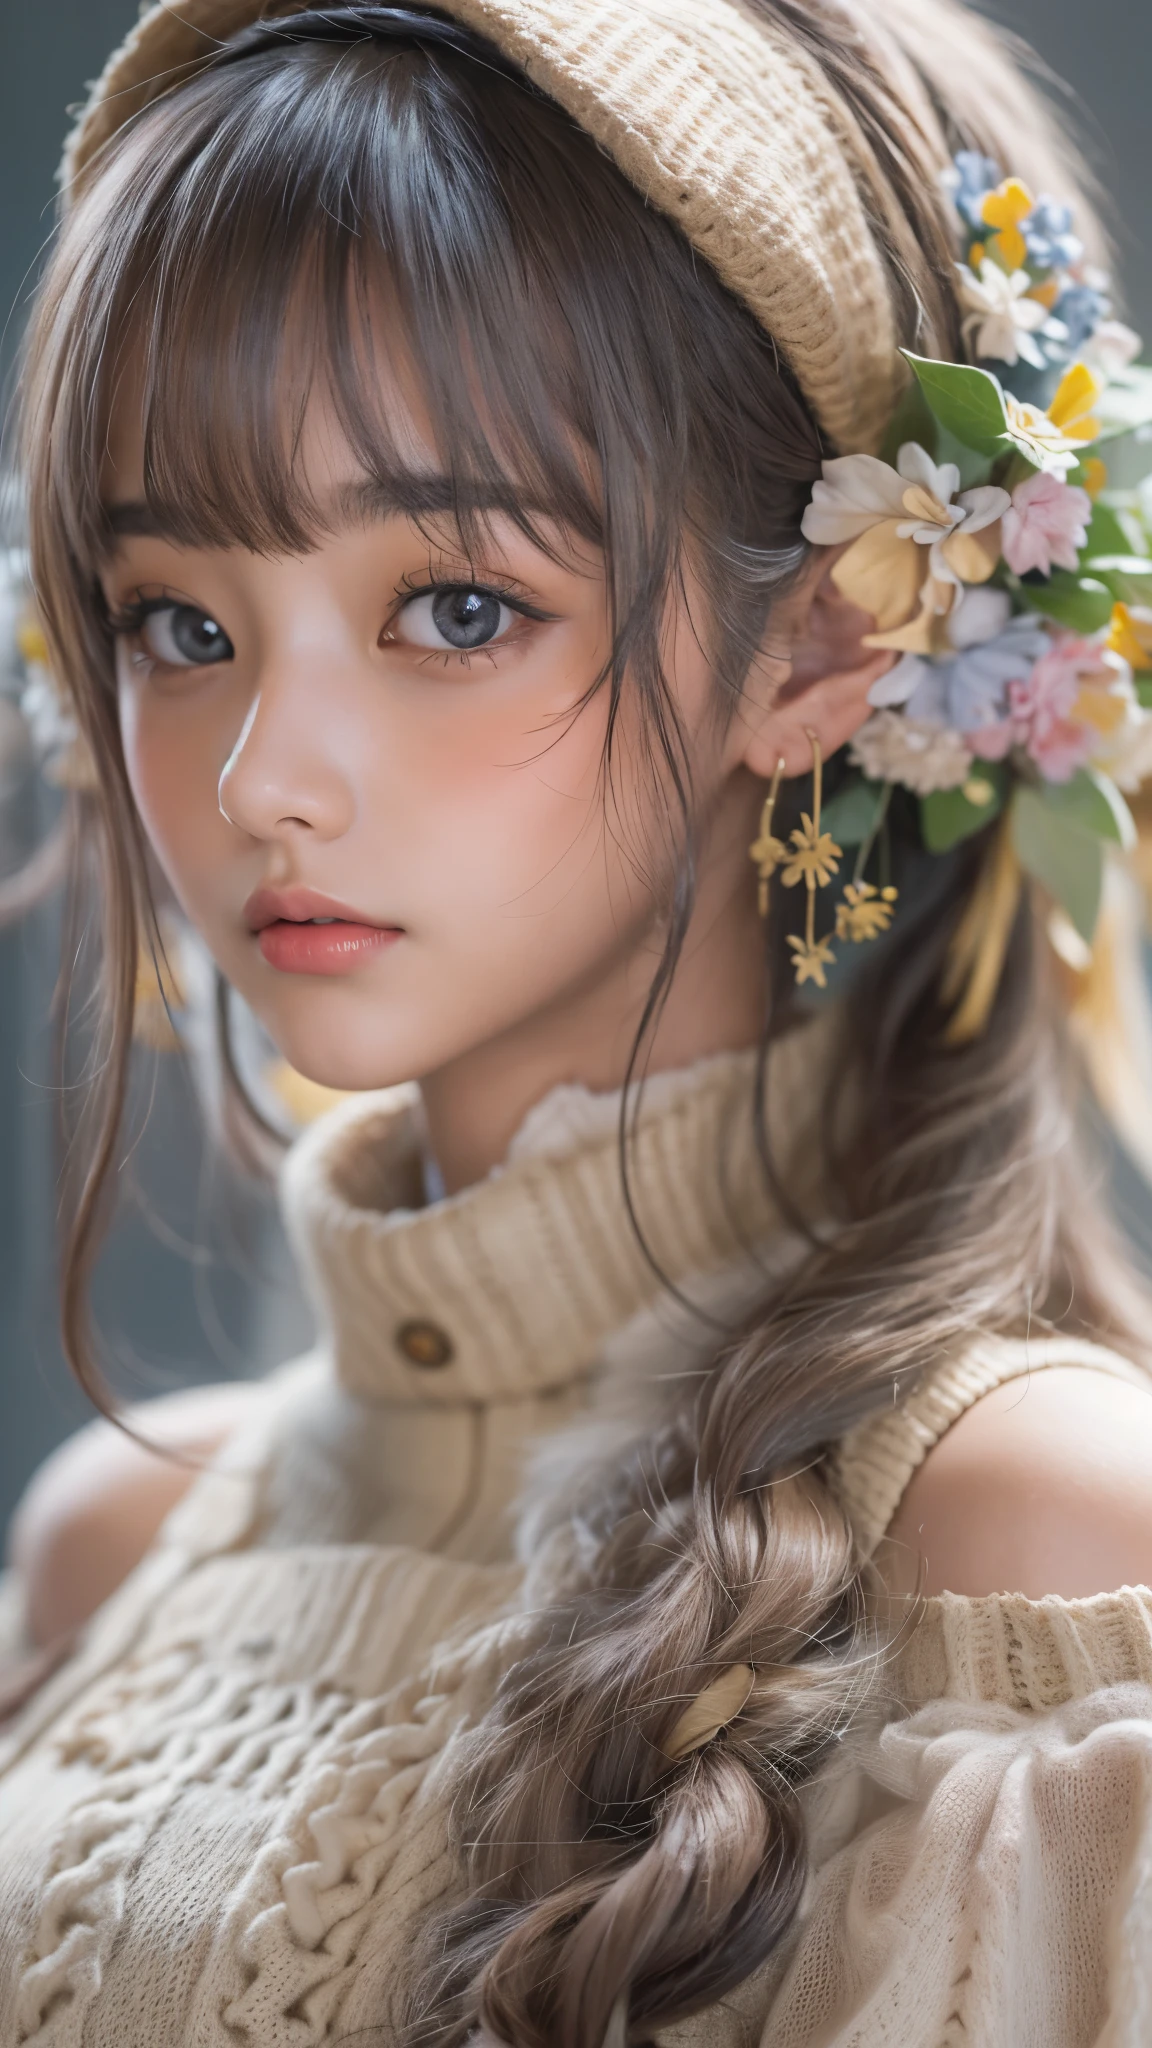 (highest qualityのディテール)、Realistic、8k Ultra HD、High resolution、(One Girl:1.2)、The Super detailed、High quality textures、Intricate details、detailed、Very detailed CG、High quality shadows、detailed Beautiful and delicate face、detailed Beautiful and delicate eyes、Depth of written boundary、Ray Tracing、20th Generation、Cute K-Pop Girls、(The Face of Ulzan in Korea)、Narrow Face、(ulzzang-6500-v1.1:0.6)、Purelos Face_v1、Glow Eyes、Perfect body、 View the viewer、(highest qualityのディテール:1.2)、Realistic、8k Ultra HD、High resolution、(One Girl:1.2)、The Super detailed、High quality textures、Intricate details、detailed、Very detailed CG、High quality shadows、detailed Beautiful and delicate face、detailed Beautiful and delicate eyes、Depth of written boundary、Ray Tracing、20th Generation、Cute K-Pop Girls、(The Face of Ulzan in Korea)、Narrow Face、(ulzzang-6500-v1.1:0.6)、cheek、glossy lips、、high resolution, Best image quality, highest quality, Photorealistic, Super detailed, Photo Real, 4K 8k Ultra HD Full Color RAW Photos, Fujifilm(Medium format), hasselblad, Carl Zeiss, Incredible dynamic range photography(utility_art：Smoose-768:1.1),High resolution, High pixel count, Clear detailed, Clear images, Natural color reproduction, noise reduction, High fidelity, quality, Software Improvements, Upscaling, Optimized Algorithms, Professional-level retouching,

1. Oversized coat:

The coat is、Choose an oversized design that covers from shoulders to knees.。Color is classic navy or black、or warm khaki or beige, wait.、Choose colors that match the season。
2. Knitted sweater or turtleneck:

To protect yourself from the cold、Choose a knitted sweater or turtleneck。Match the texture and color of the knit to the coat.。
3. Wide leg pants:

For pants, Choose a wide-leg design、Combines ease of movement and style。Denim in dark tones or black trousers will look good.。
4. Knee-high boots:

What is included in an oversized coat、Pair with knee-high boots that cover your ankles and calves。Boots are black or dark brown and chic.、Gives a stylish impression。
5. With accessories:

Choose simple gold or silver accessories、Add elegance to your outfit。for example、Long necklaces and large earrings are recommended.。
6. Handbags:

Handbags、Choose a color that matches the tone of your outfit.。Shoulder bags and tote bags are convenient and stylish。
7. Makeup and hairstyle:

Makeup, Choose natural colors to flatter your skin。Wavy Hair、By creating loose curls、Appeal to softness。